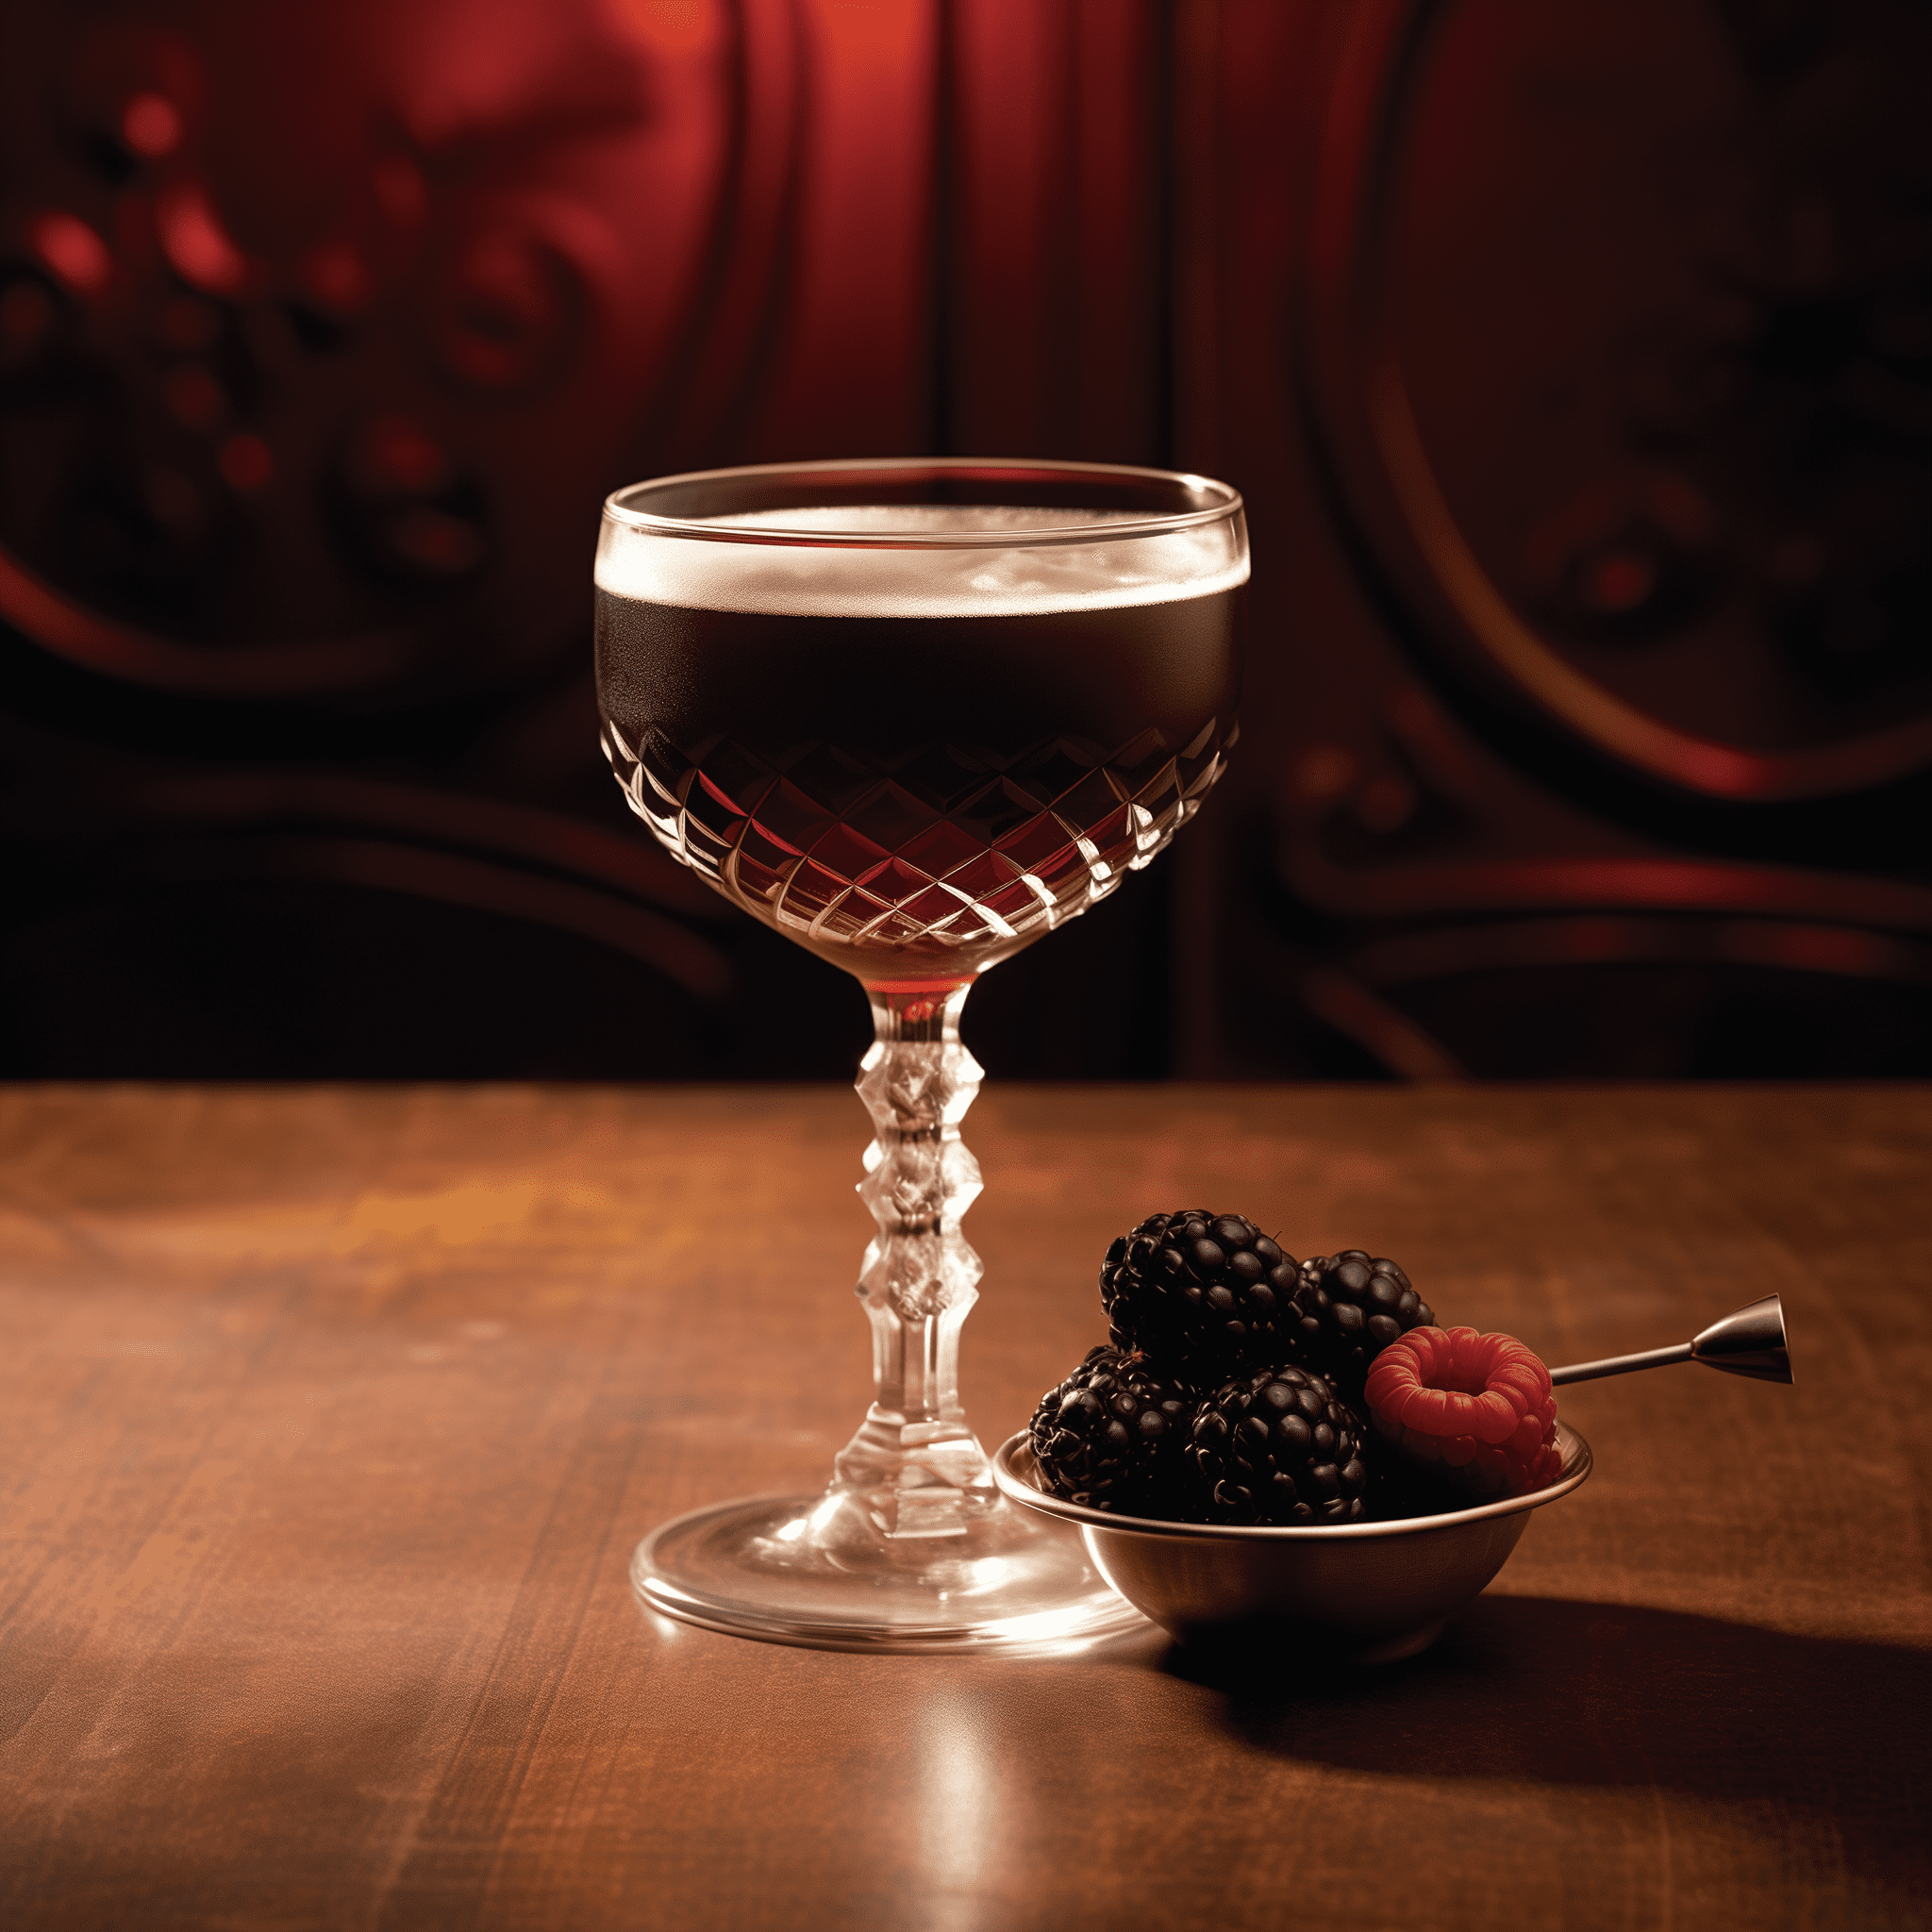 The Black Door Cocktail Recipe - The Black Door cocktail offers a velvety, rich taste with a hint of sweetness balanced by a touch of bitterness. The herbal notes from the vermouth are complemented by the smoky undertones of the Scotch, creating a complex and intriguing flavor profile.